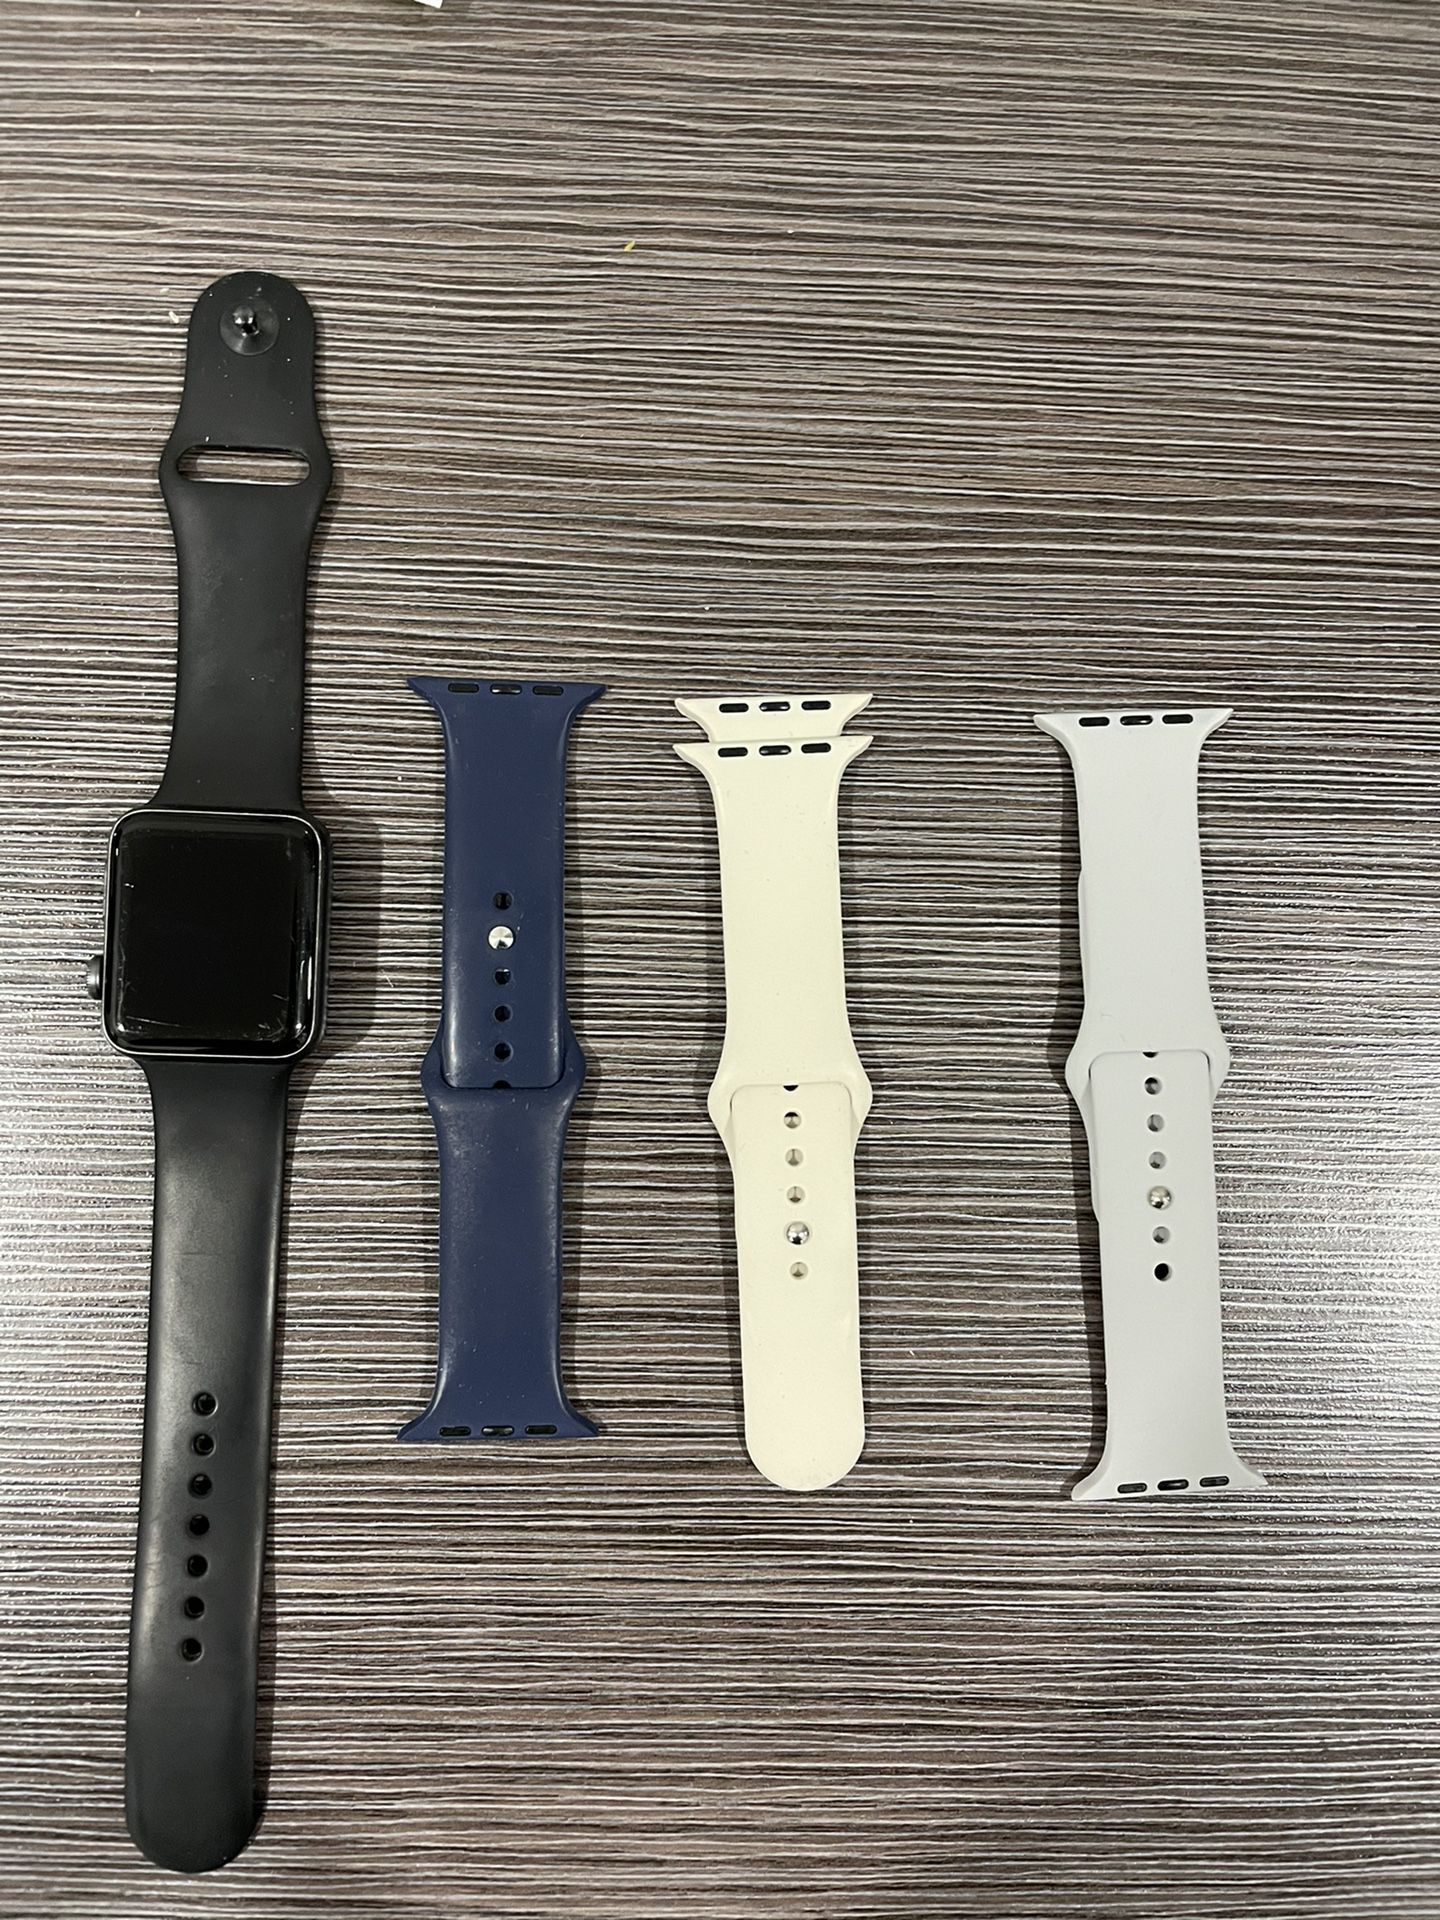 Apple Watch series 3 42mm screen (gps) comes with charger and 3 additional bands